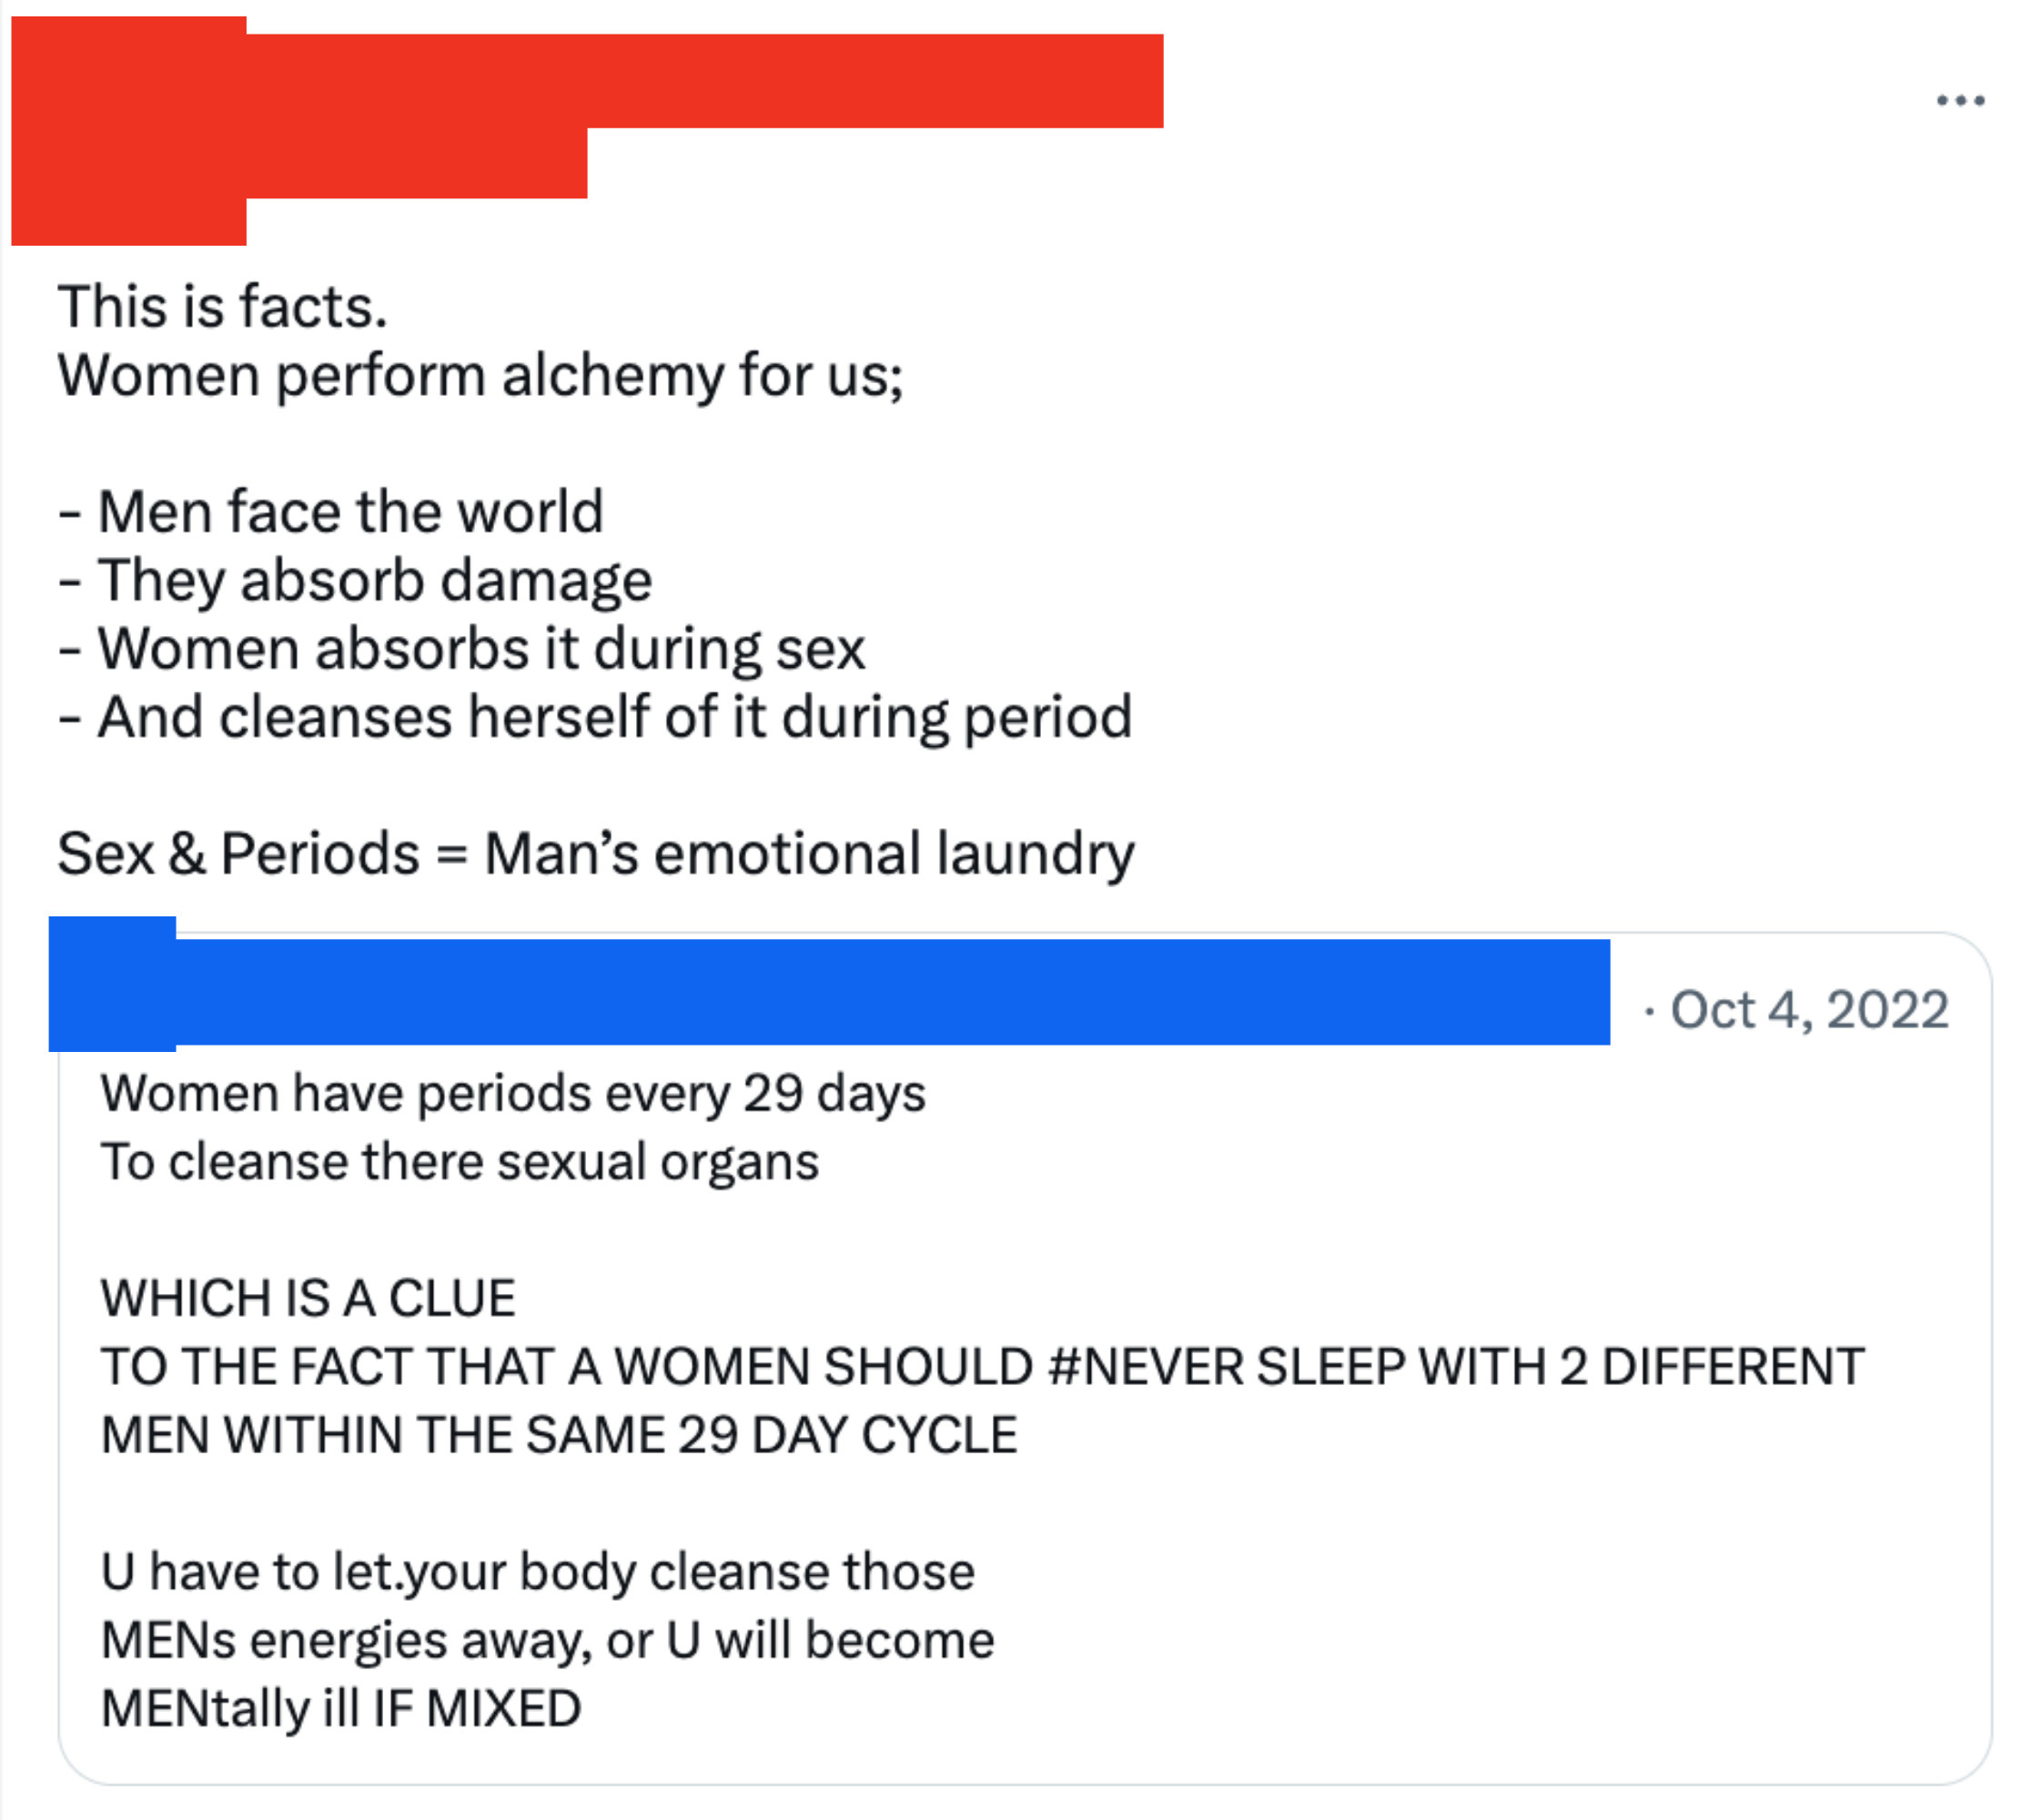 Women perform alchemy for men: Men face the world, they absorb damage, women absorb it during sex and cleanse themselves of it during period, so sex &amp; periods = man&#x27;s emotional laundry, which is why women shouldn&#x27;t sleep with 2 men during the same cycle